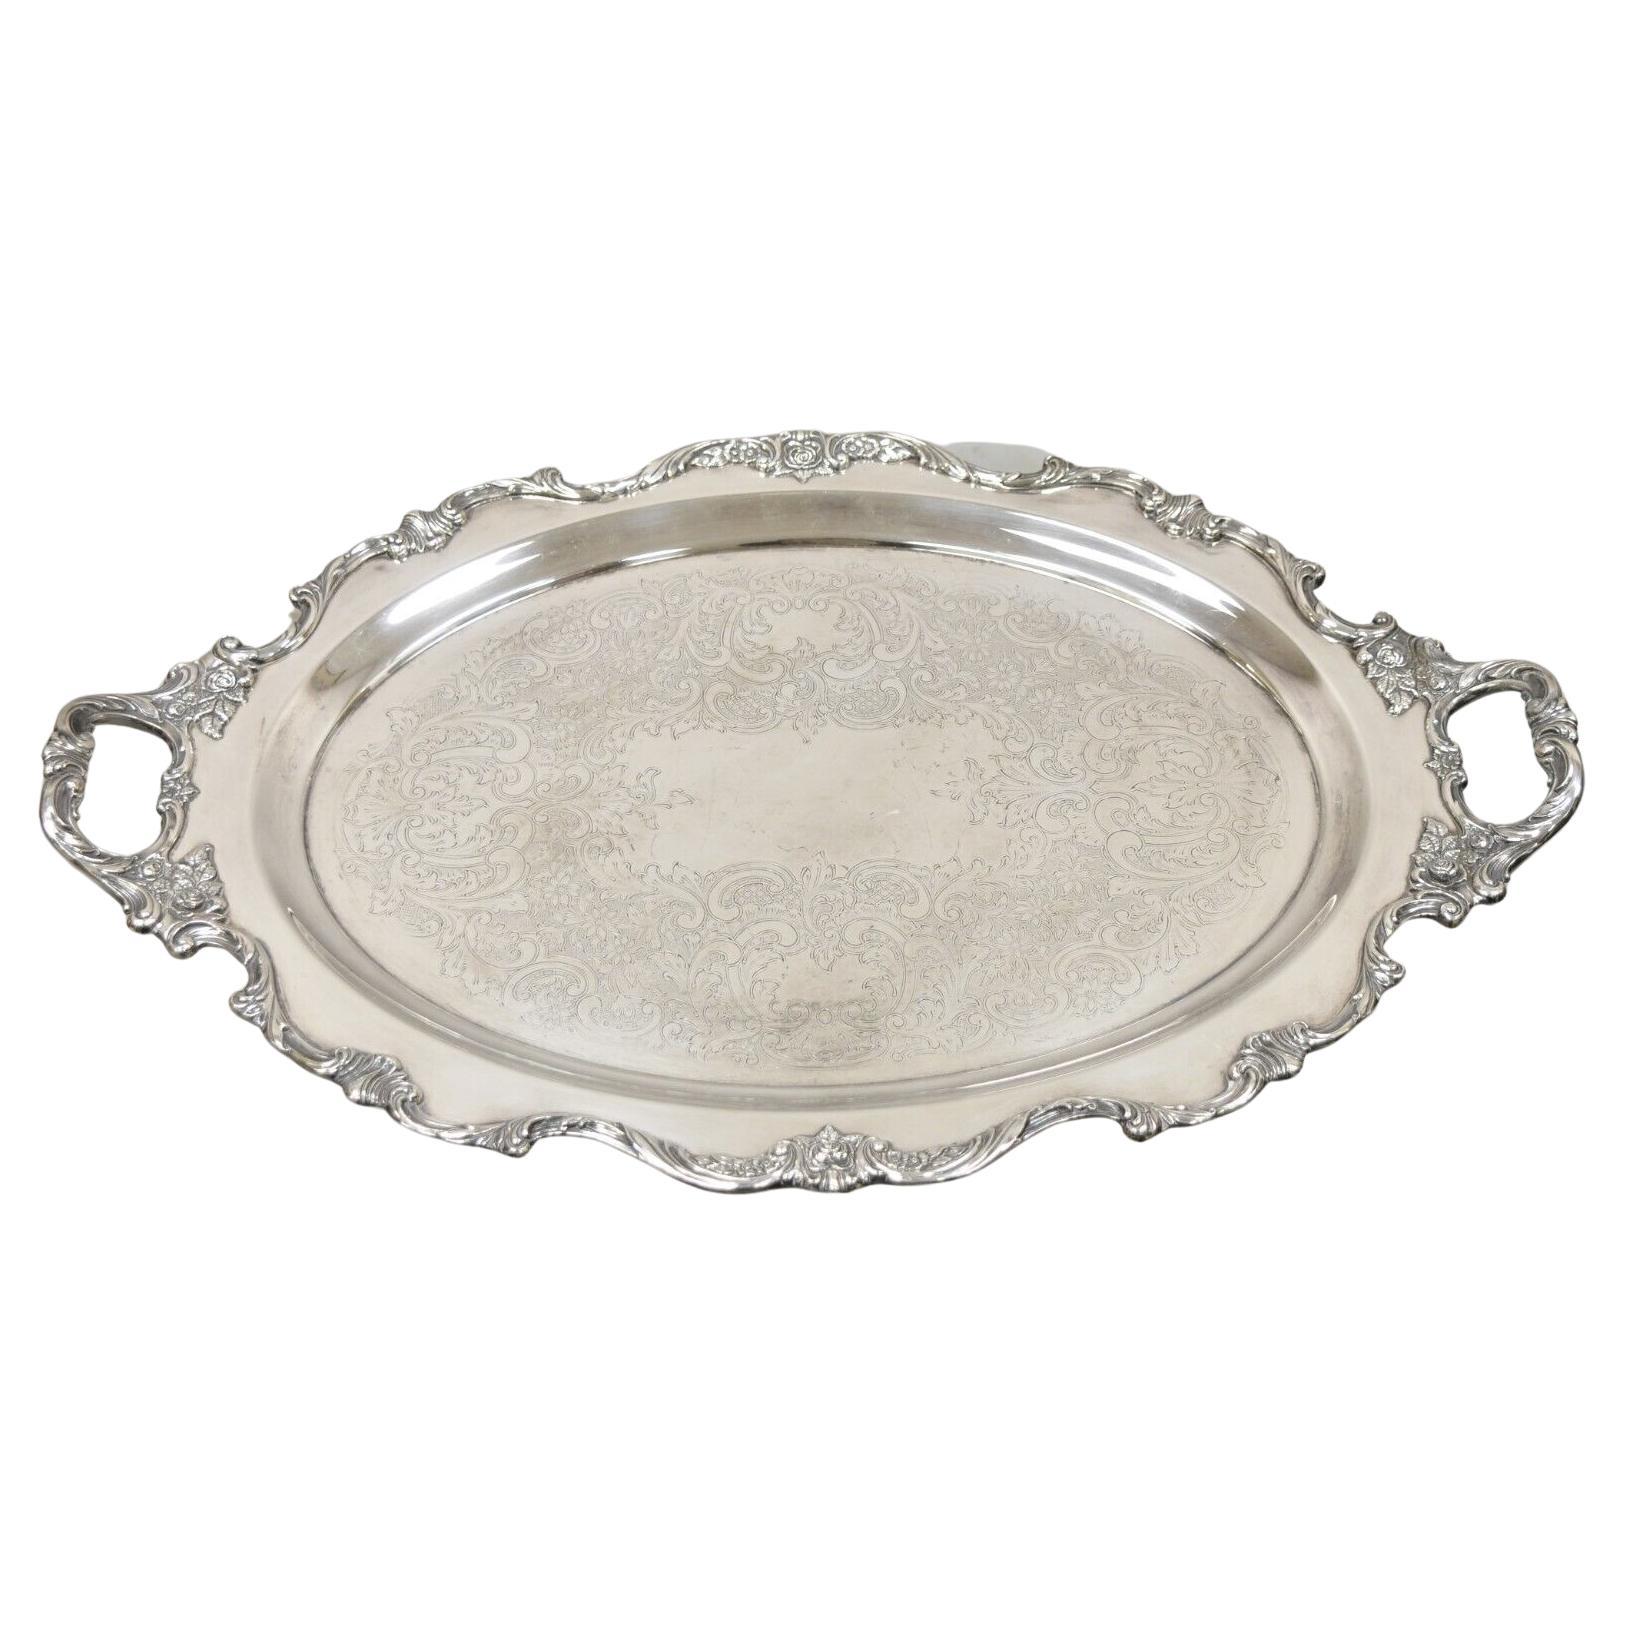 Vintage Wallace Royal Rose 9826 Silver Plated Ornate Oval Serving Platter Tray For Sale